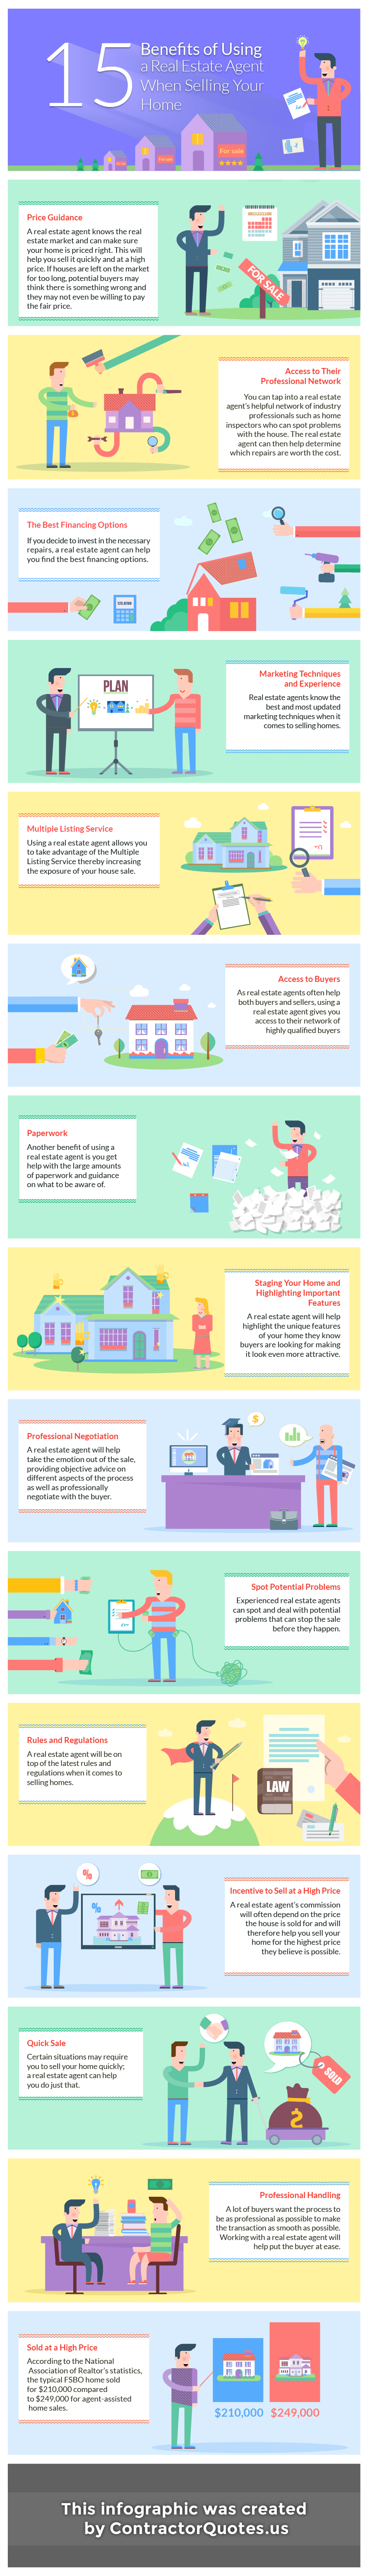 infographic showing the benefits of using a real estate agent